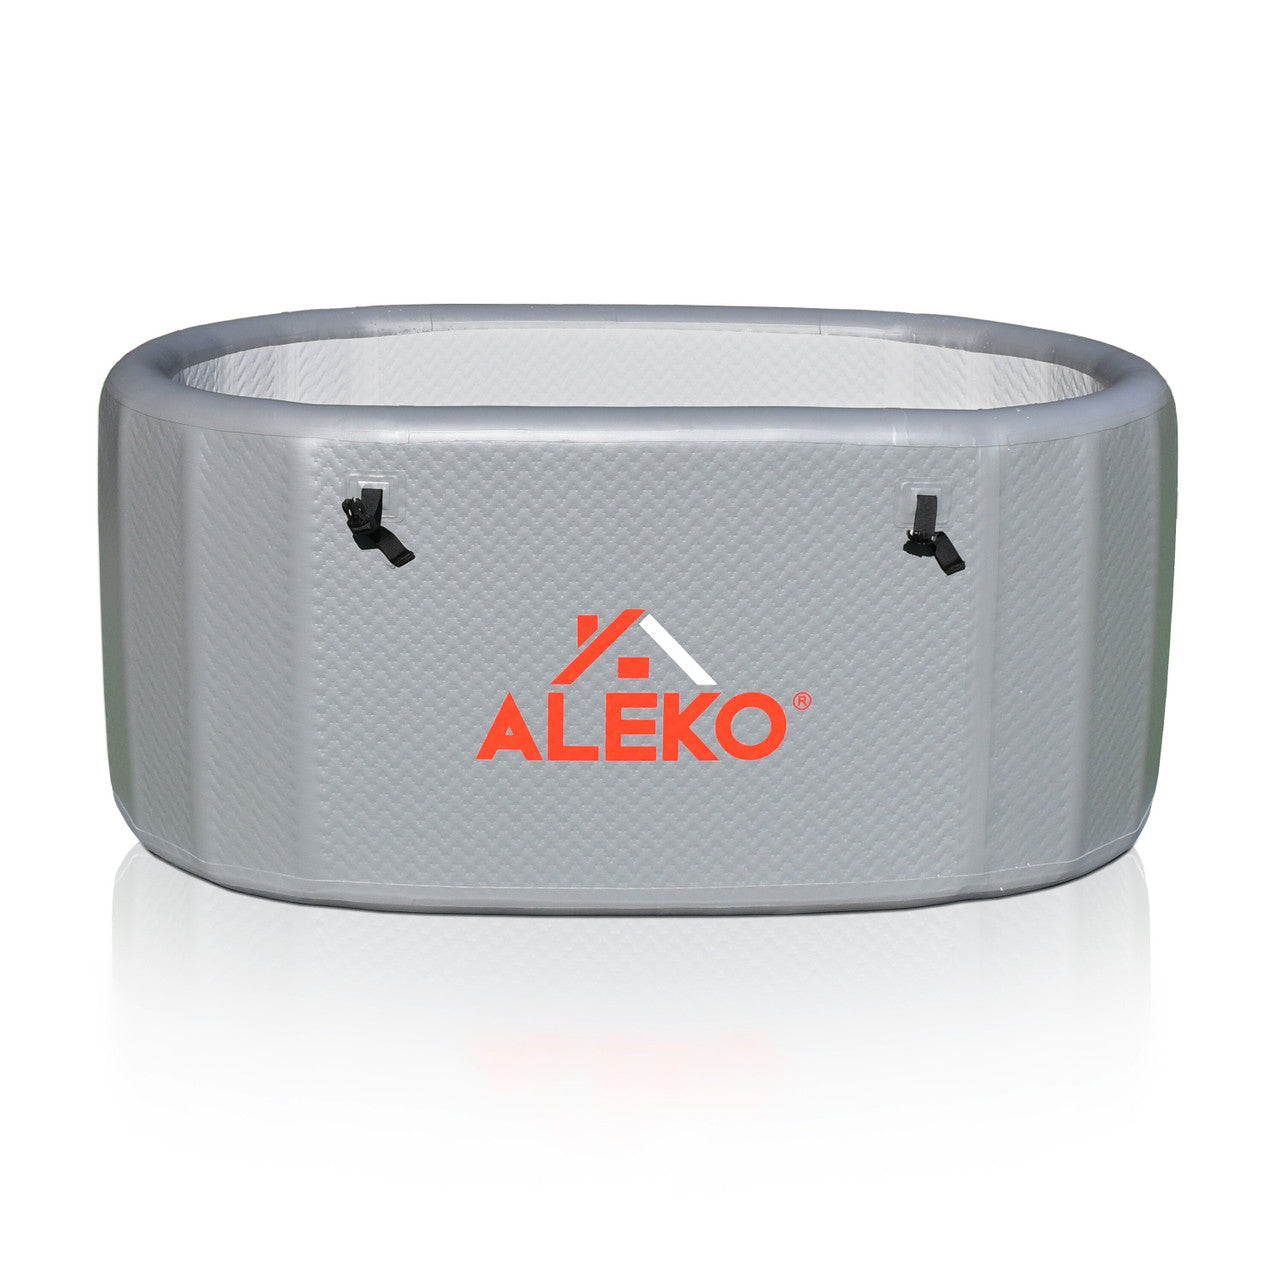 Aleko Inflatable Cold Plunge with Locking Lid and Carry Bag INFOTUBGREY-AP - Serenity Provision